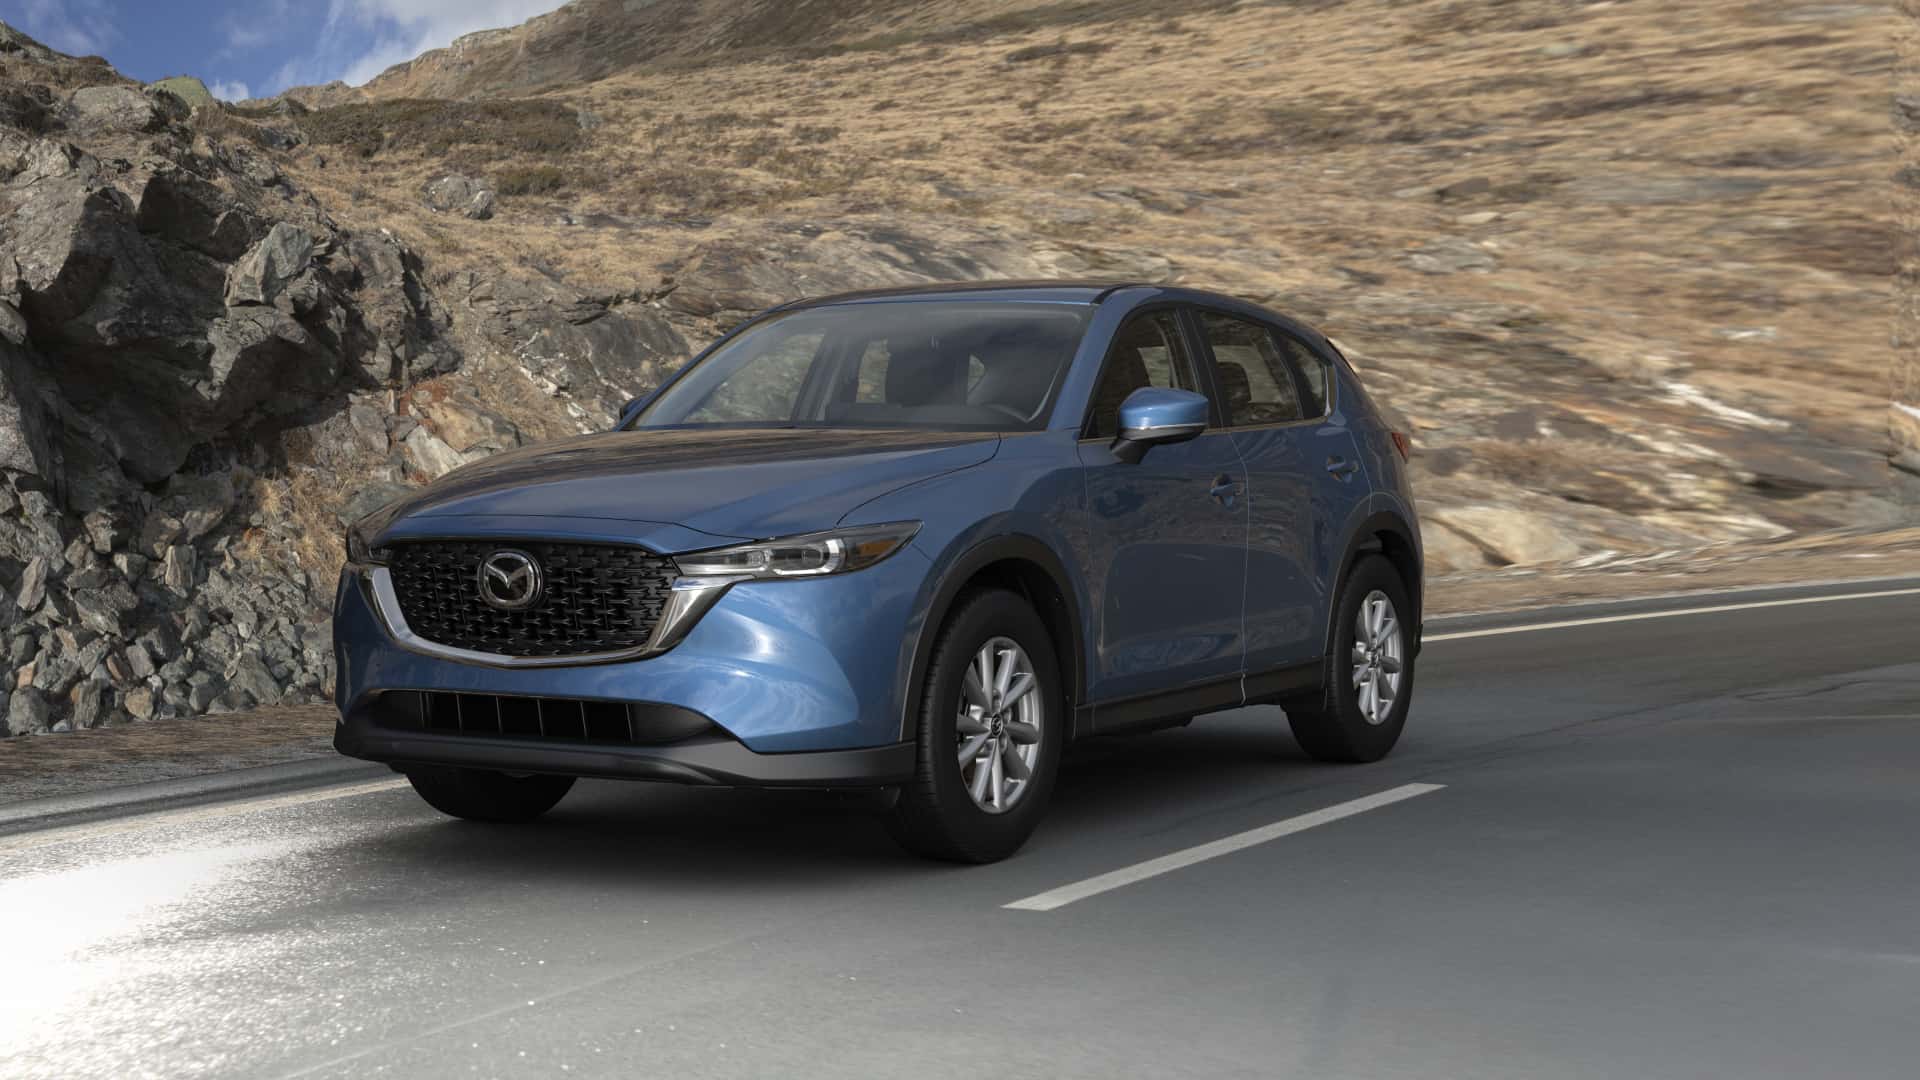 2023 Mazda CX-5 2.5 S Deep Crystal Blue Mica | Russell & Smith Mazda in Houston TX